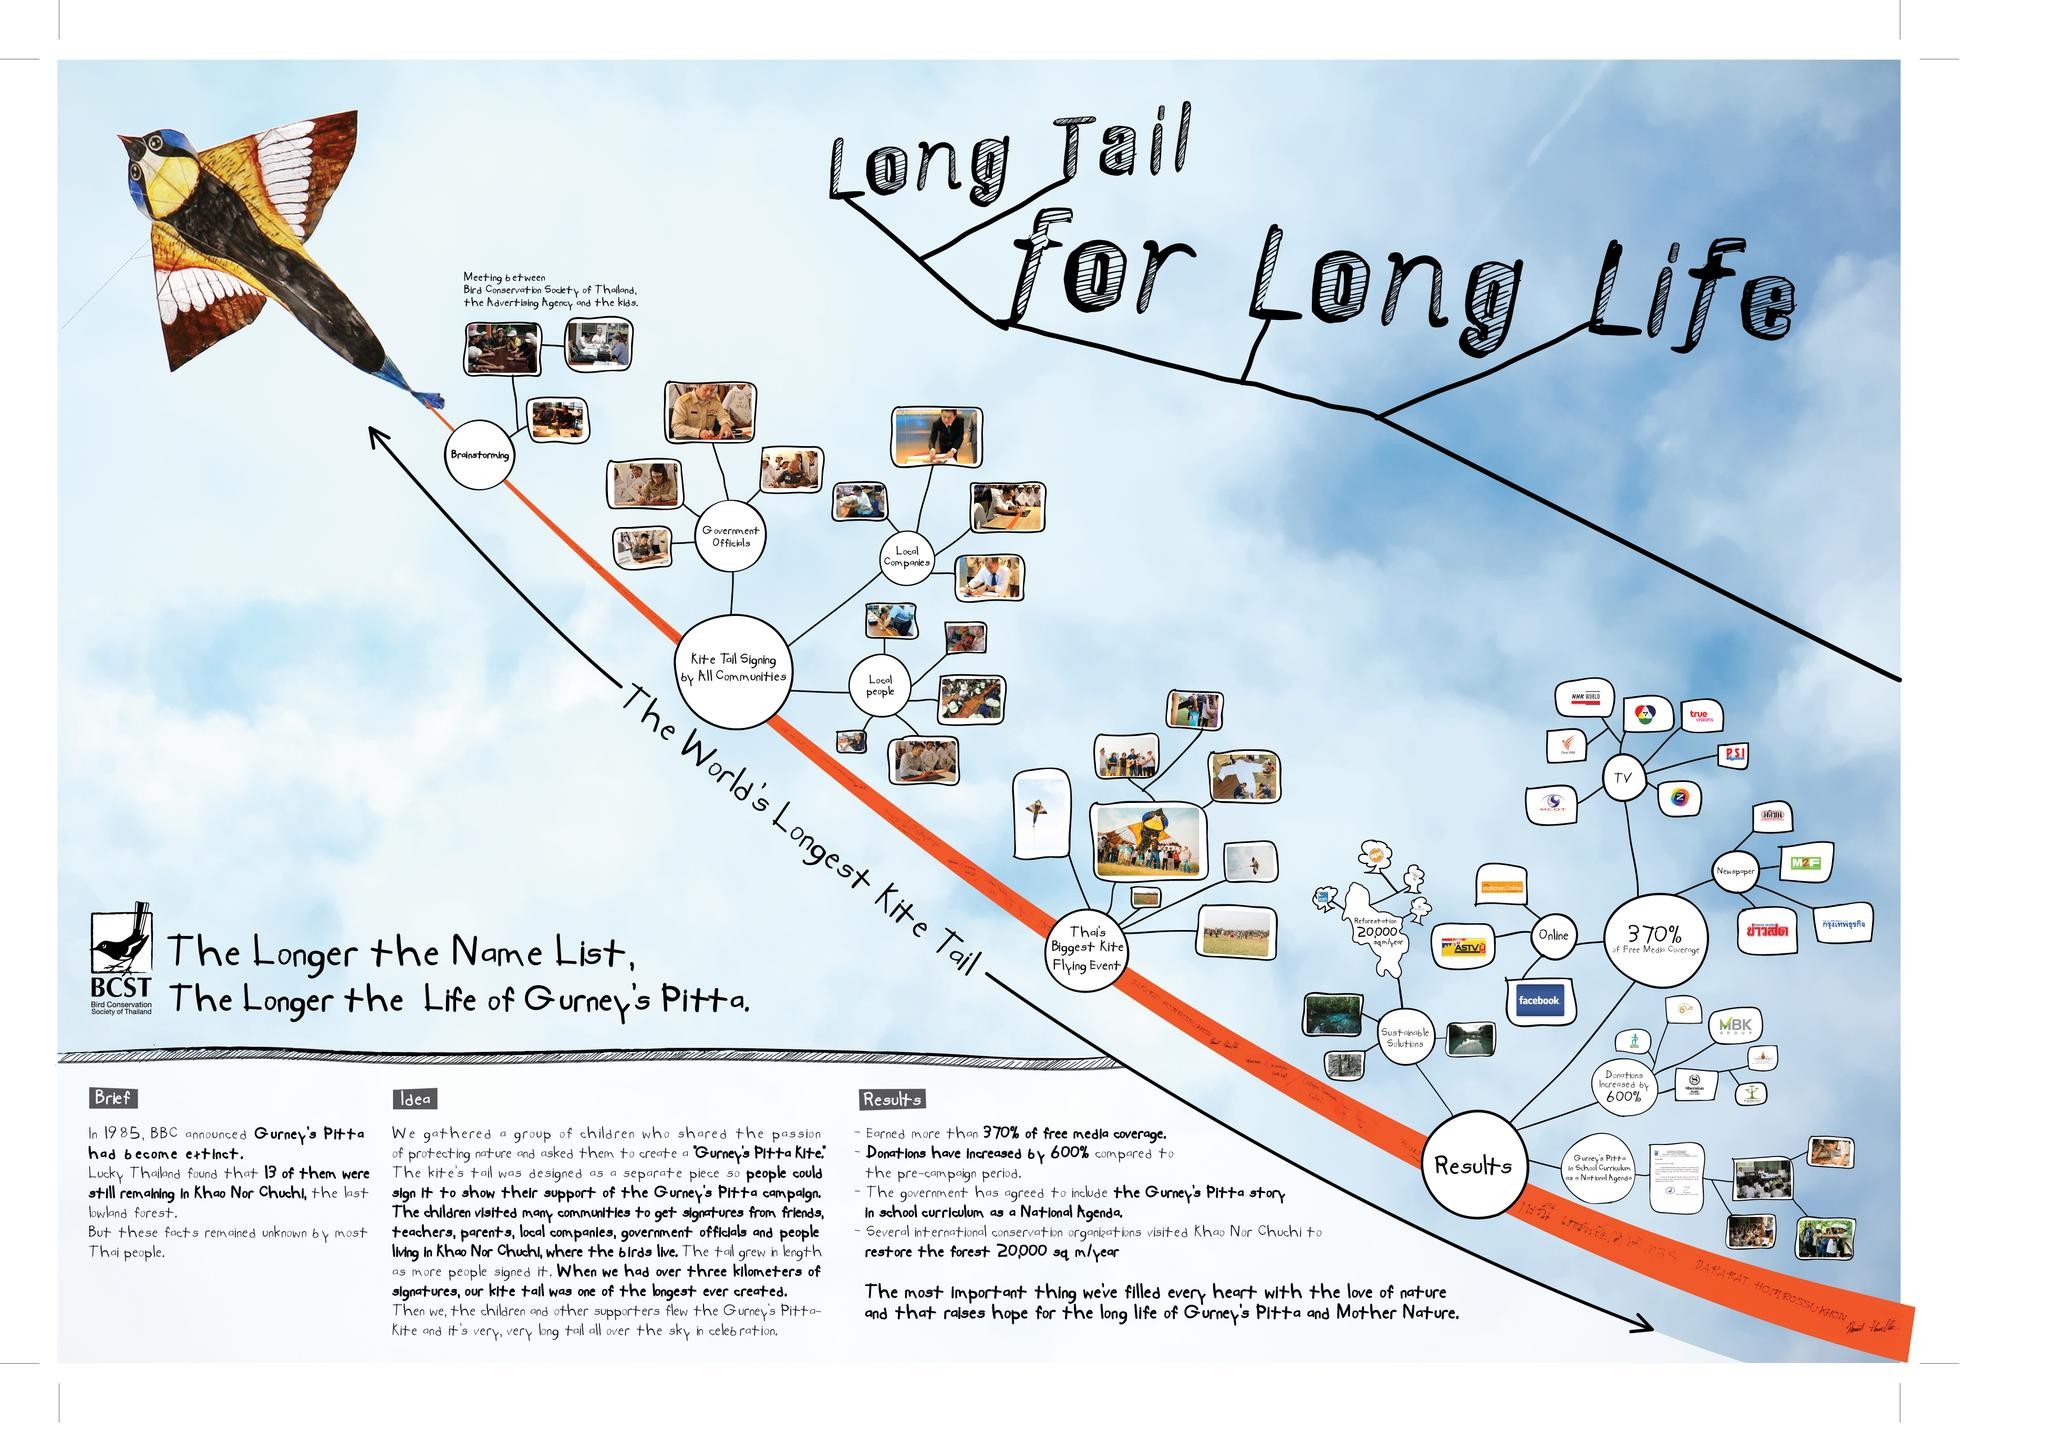 LONG TAIL FOR LONG LIFE